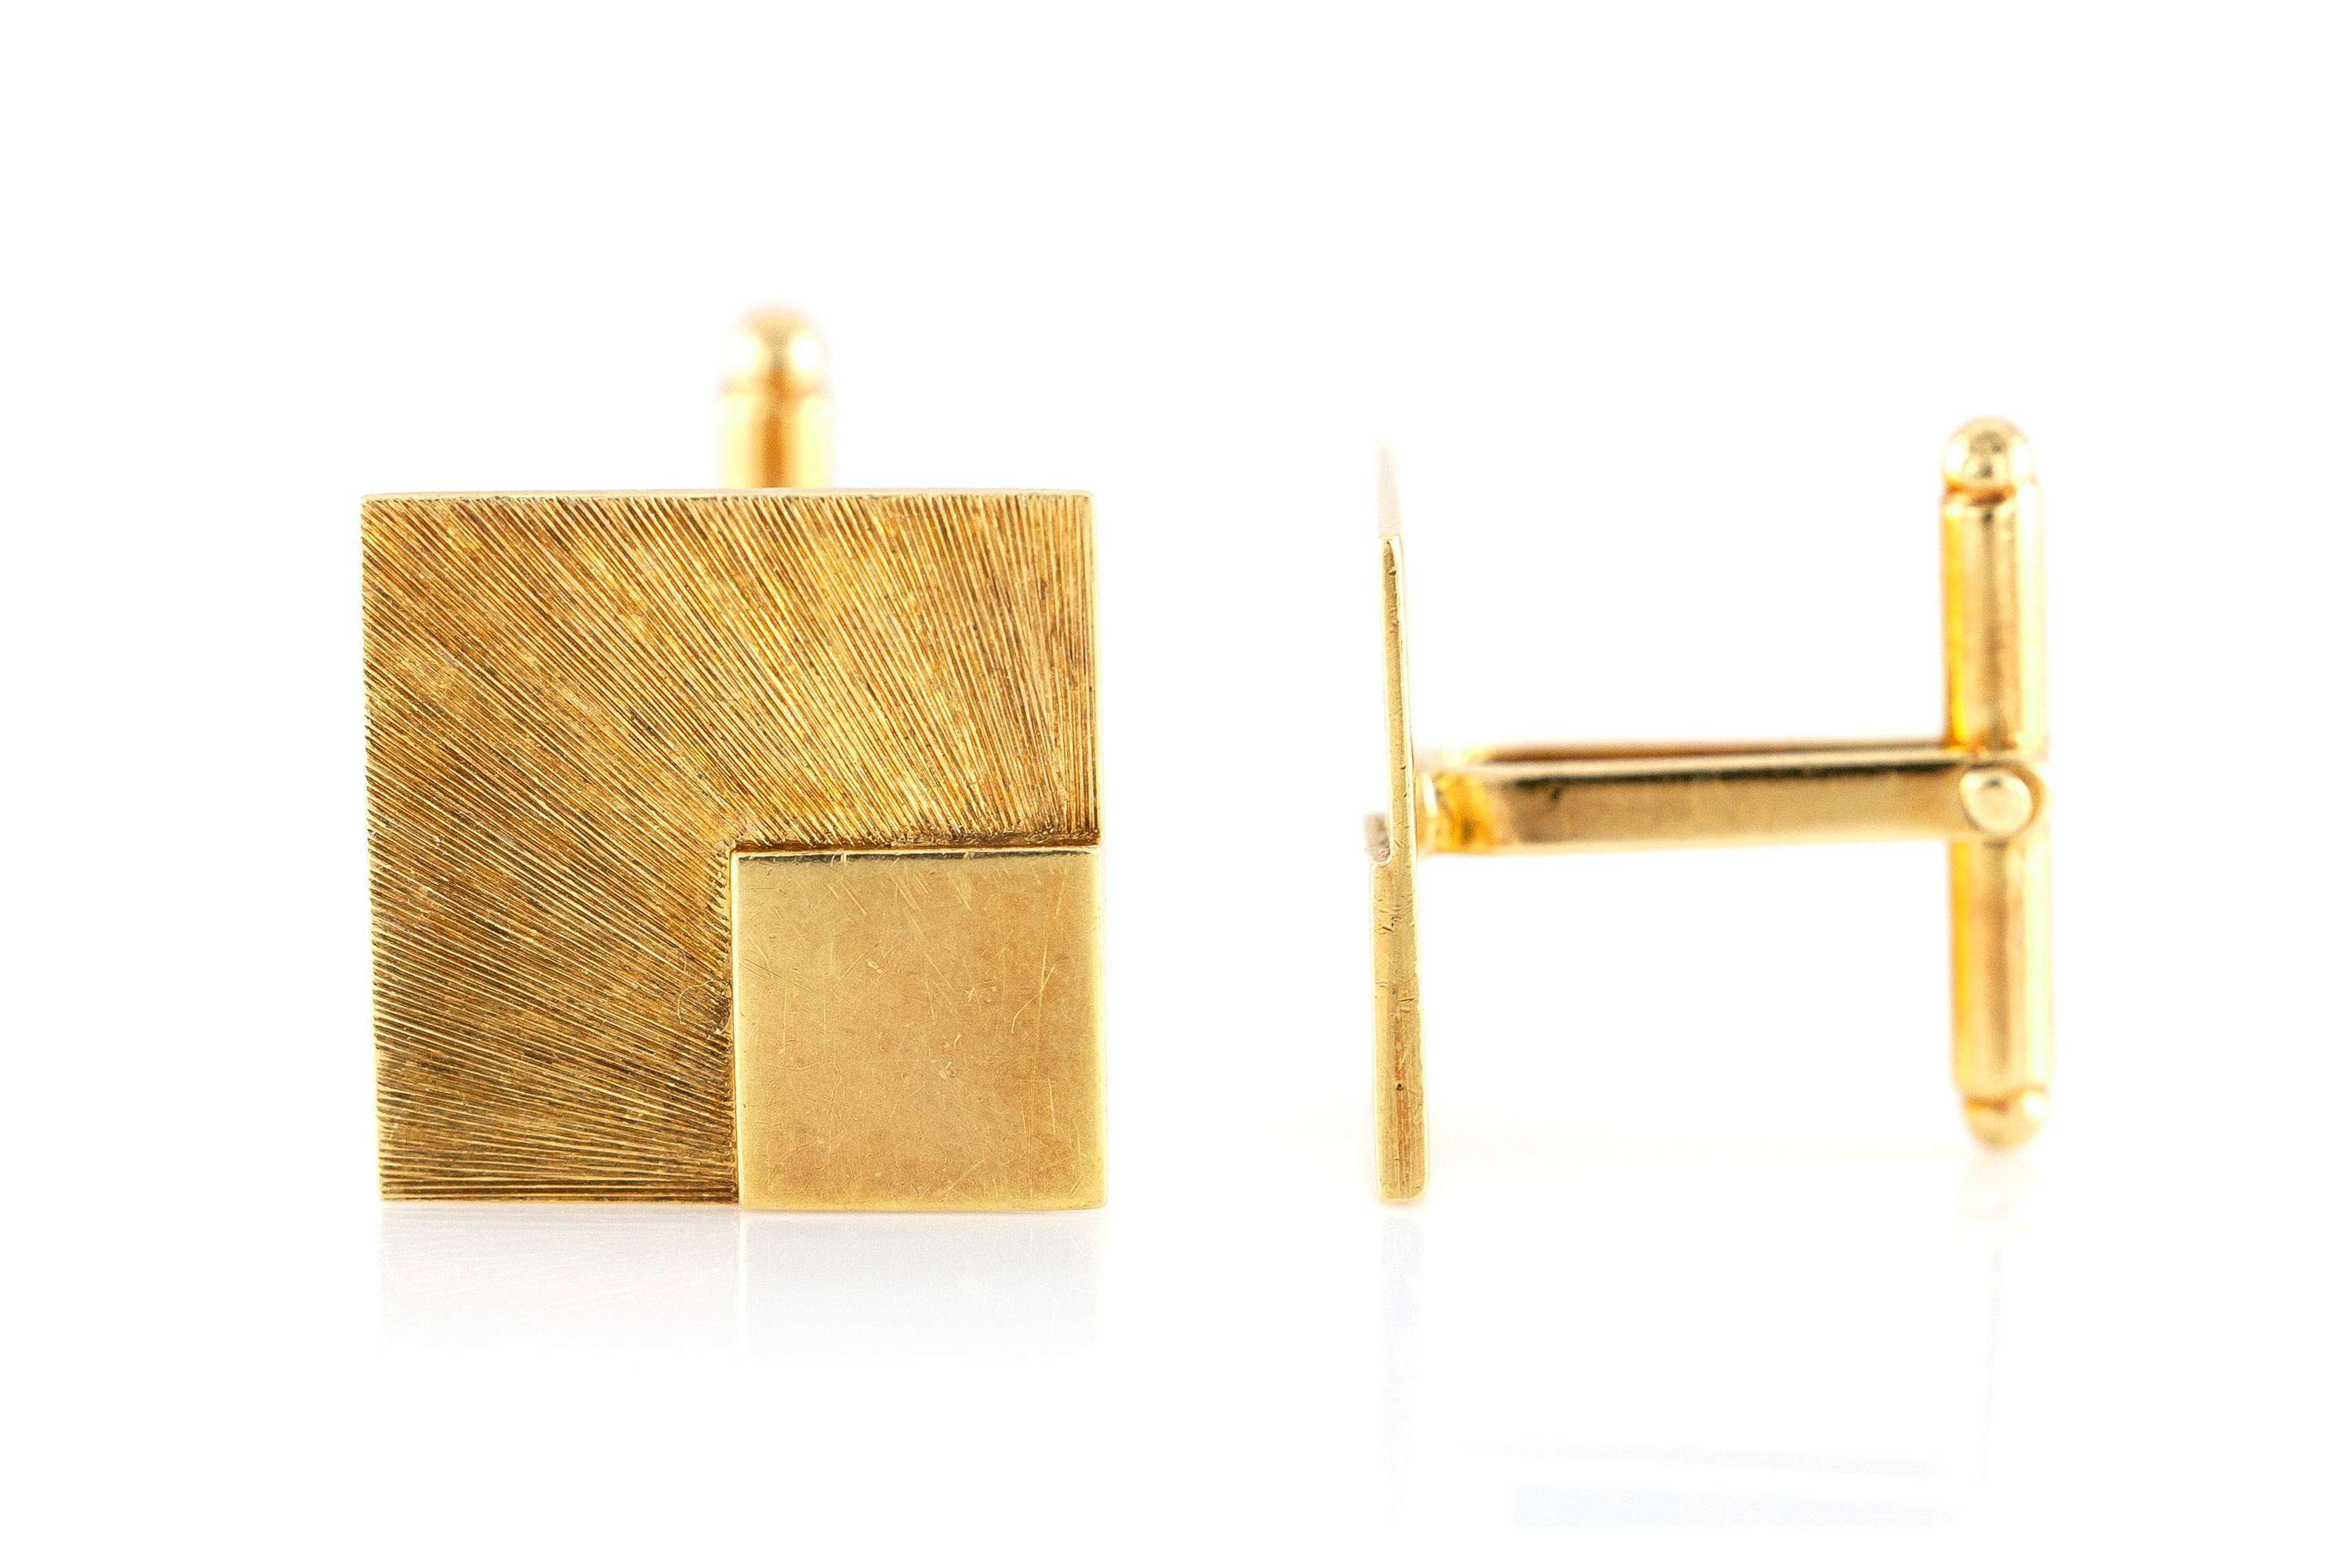 Cufflinks finely crafted in 18k yellow gold weighing a total of 6.1 dwt., size of each cufflink is 1 inch. Circa 1980.